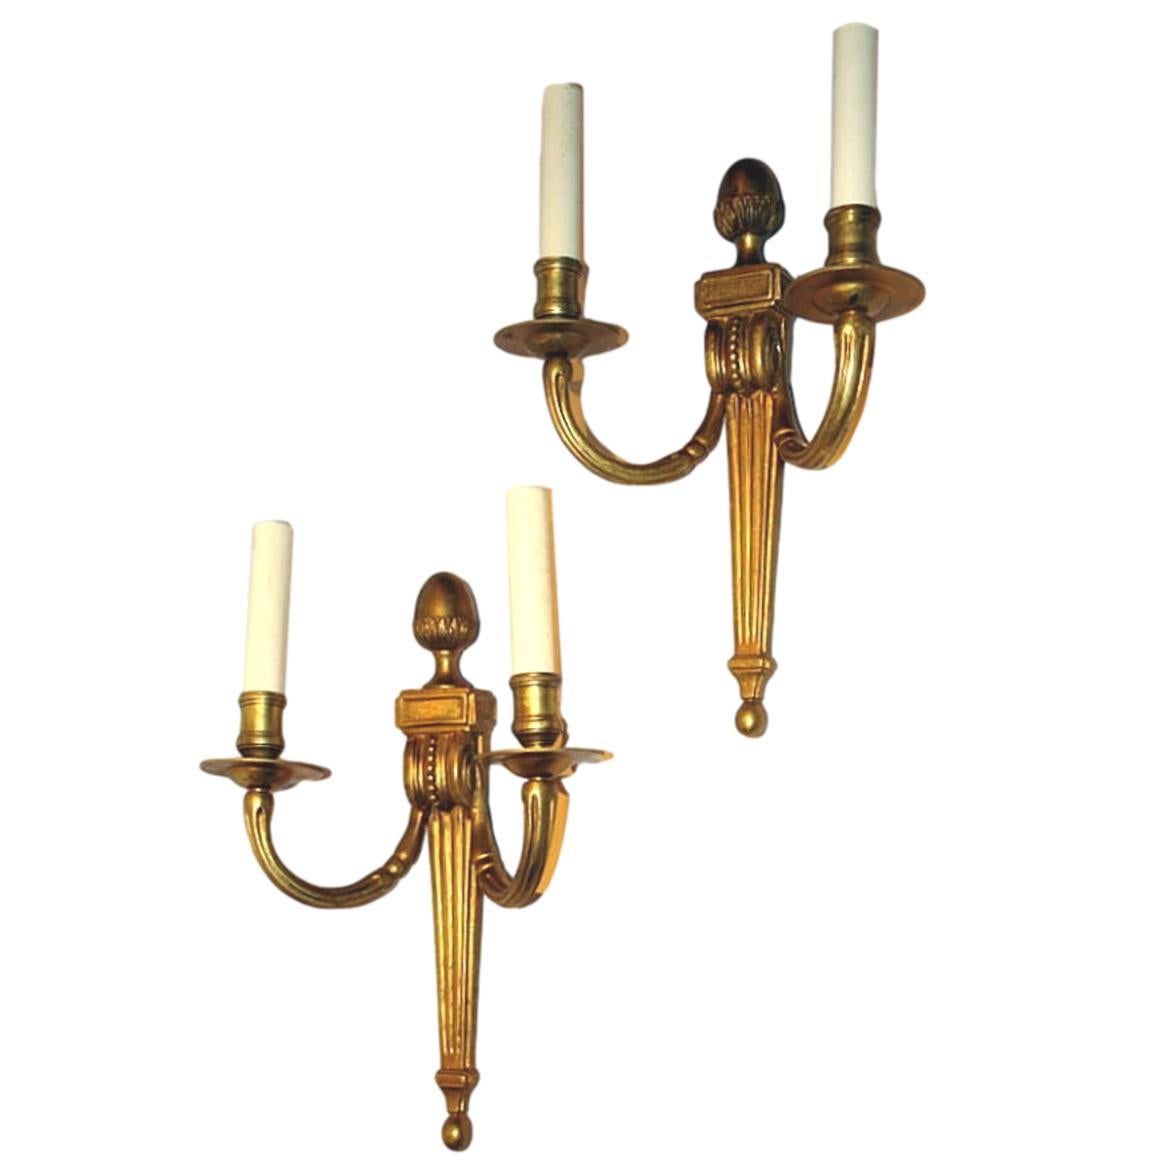 Set of eight circa 1920's French neoclassic style gilt bronze double light sconces with acorn crowning the top and with tapered and fluted body. Sold in pairs.

Measurements:
Height: 13